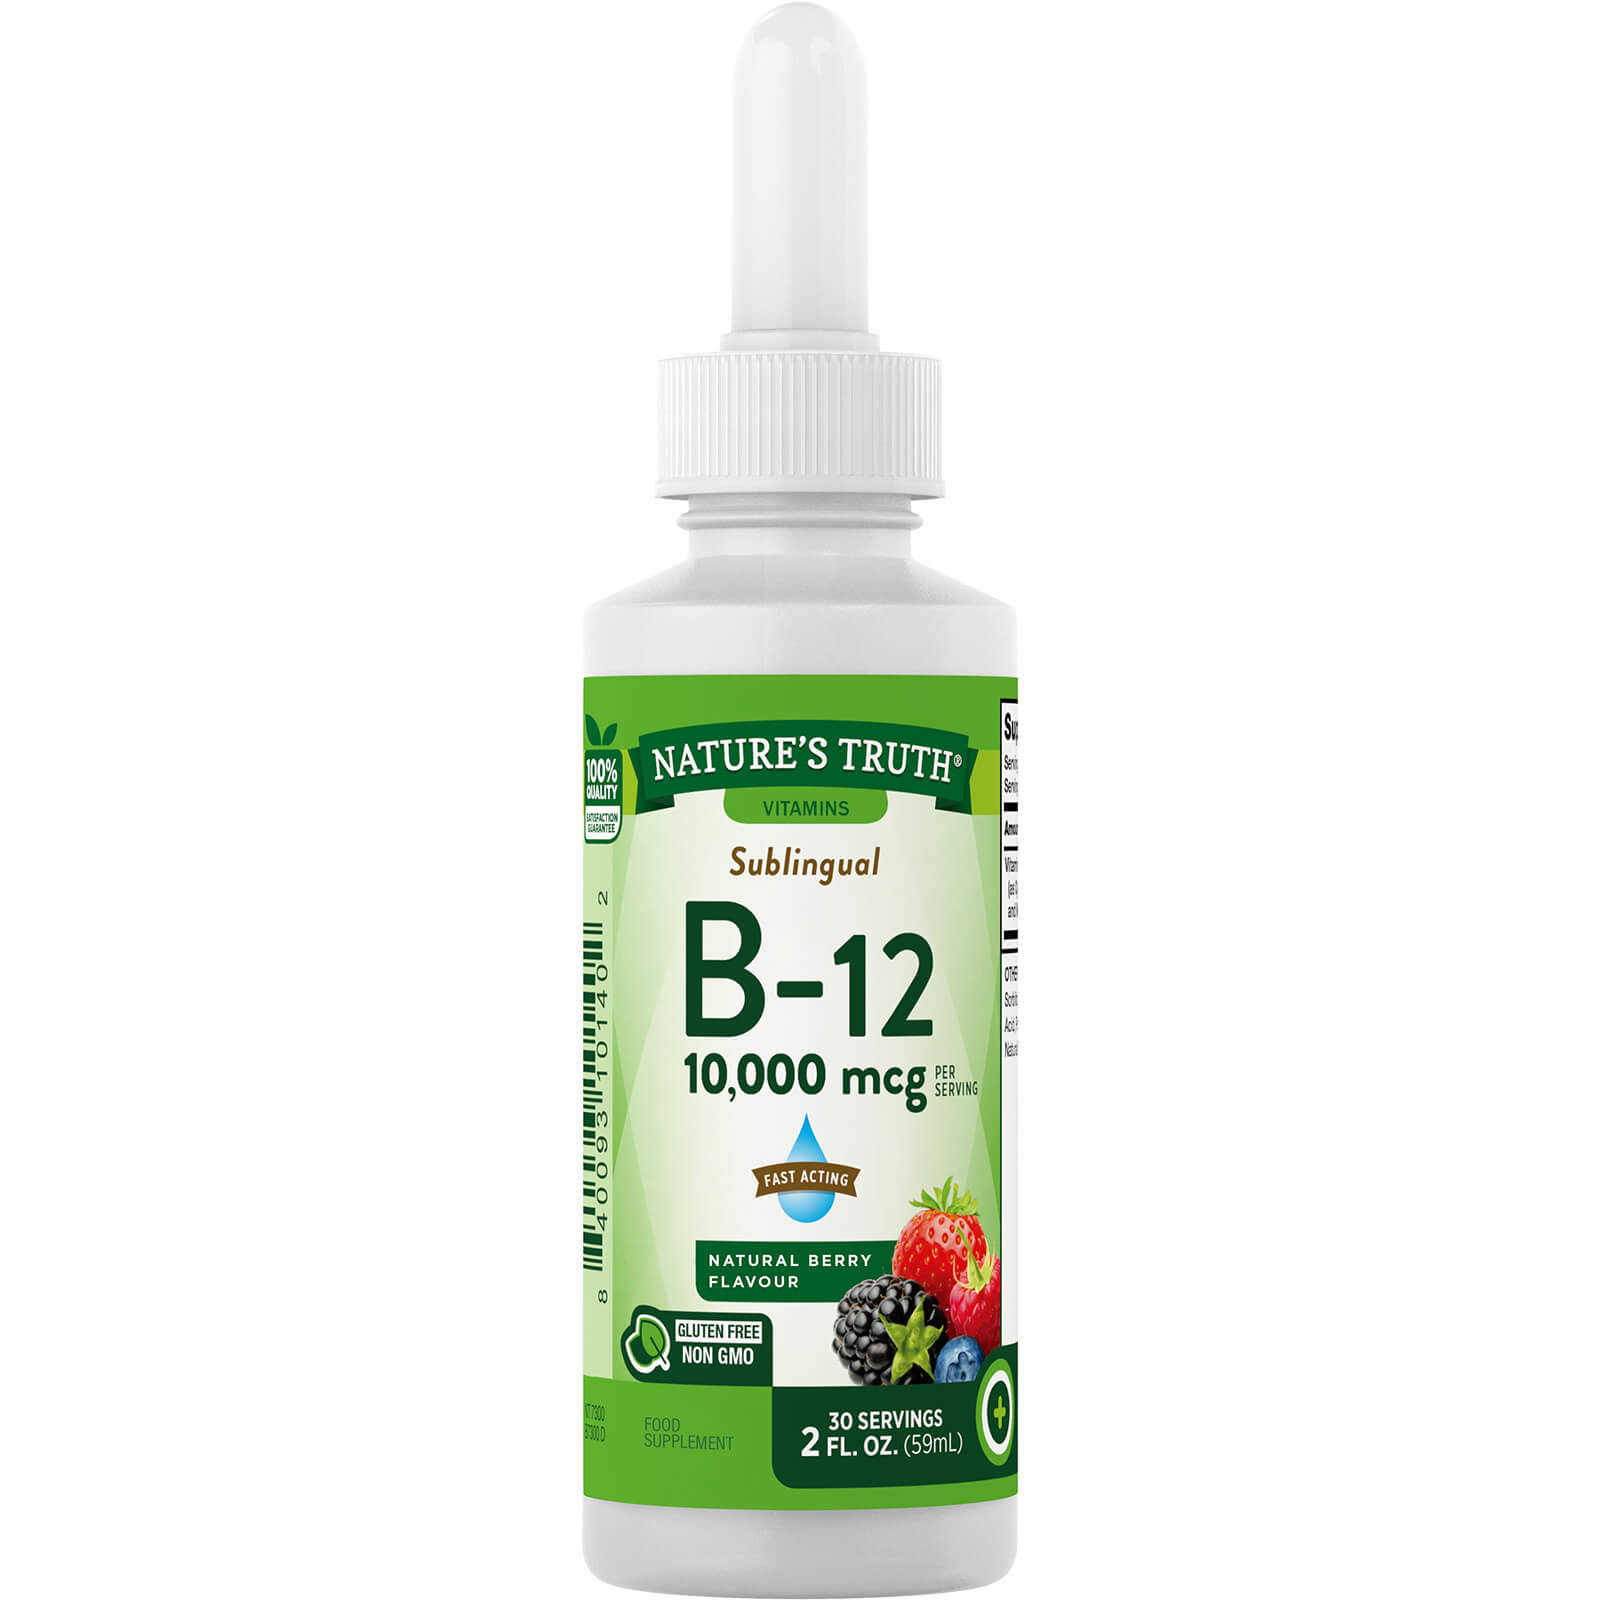 Nature's Truth Sublingual B-12 Vitamin - Fast Acting Liquid, Natural Berry Flavour, 2oz